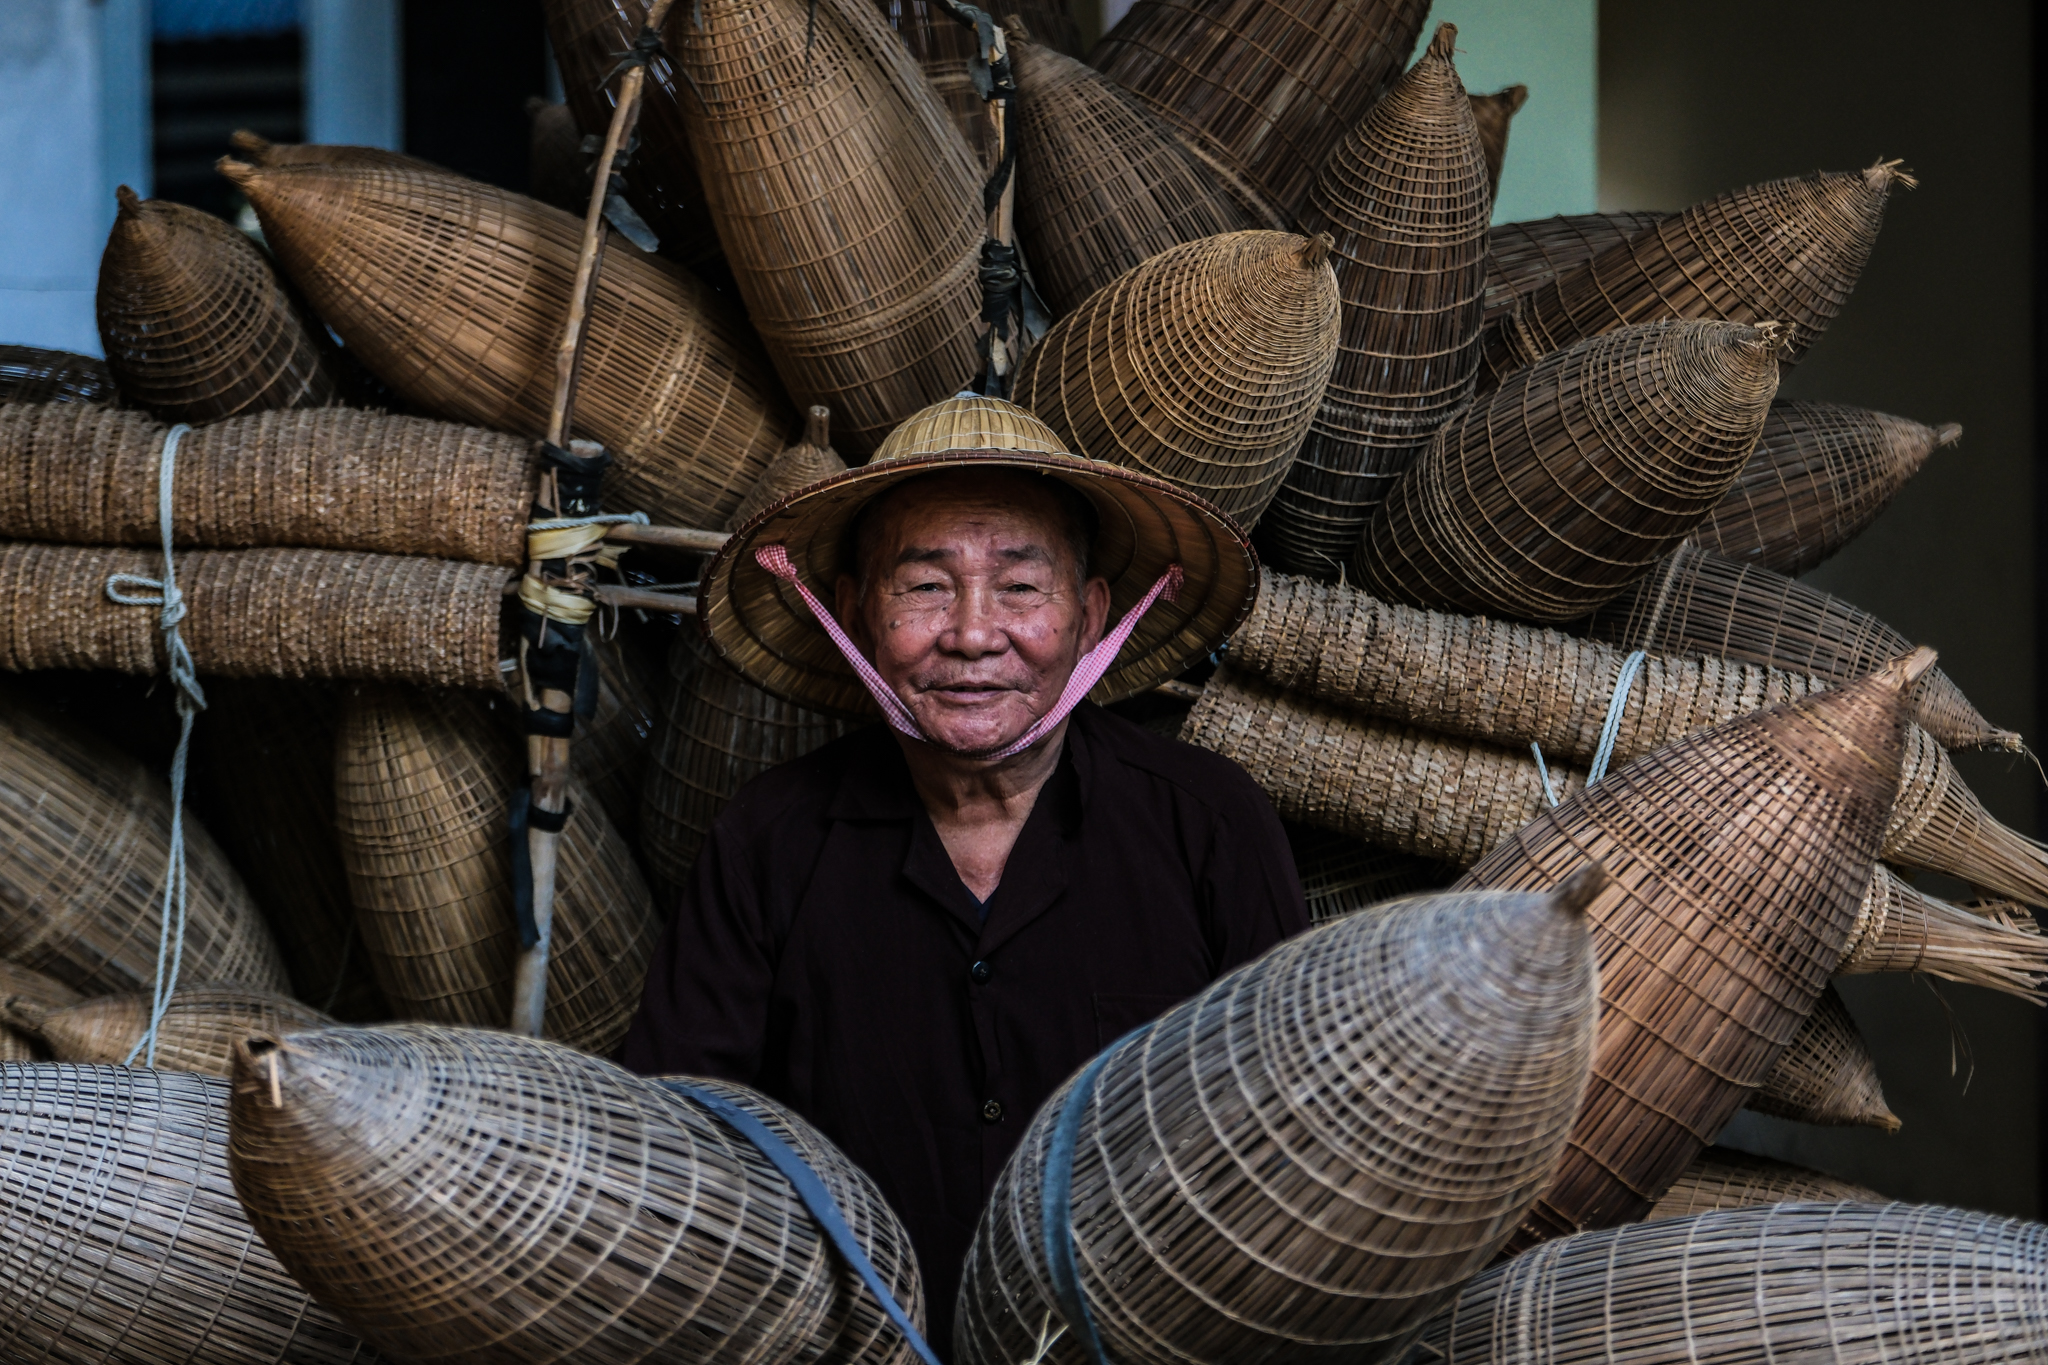 Luong Son Bac, 83, has over 70 years of experience in making bamboo fishing traps. He now retains the job as his hobby in old age and for tourists to see. Photo: Nam Tran / Tuoi Tre News